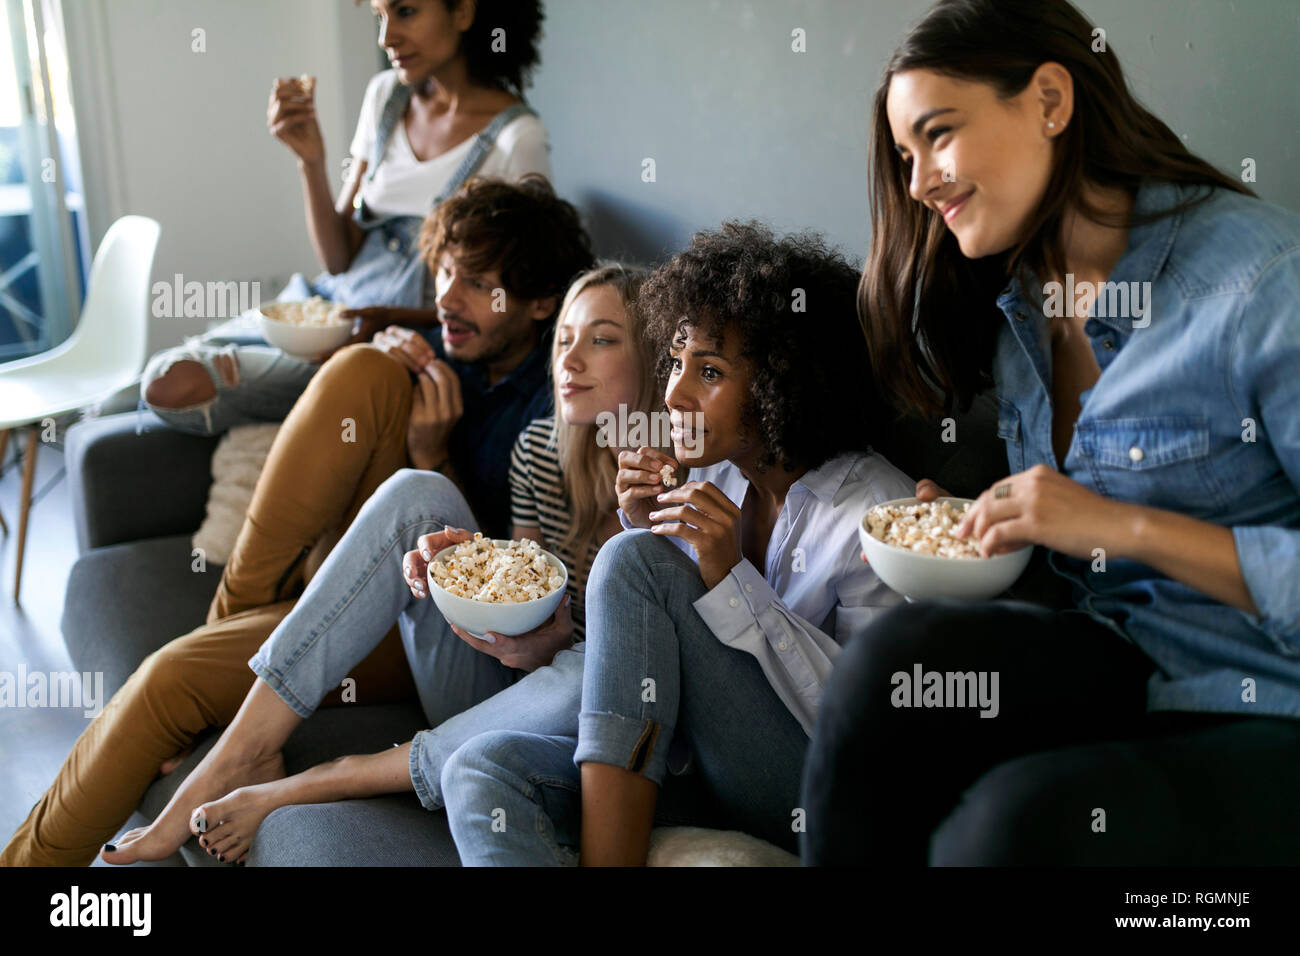 Friends sitting on couch watching tv Stock Photo